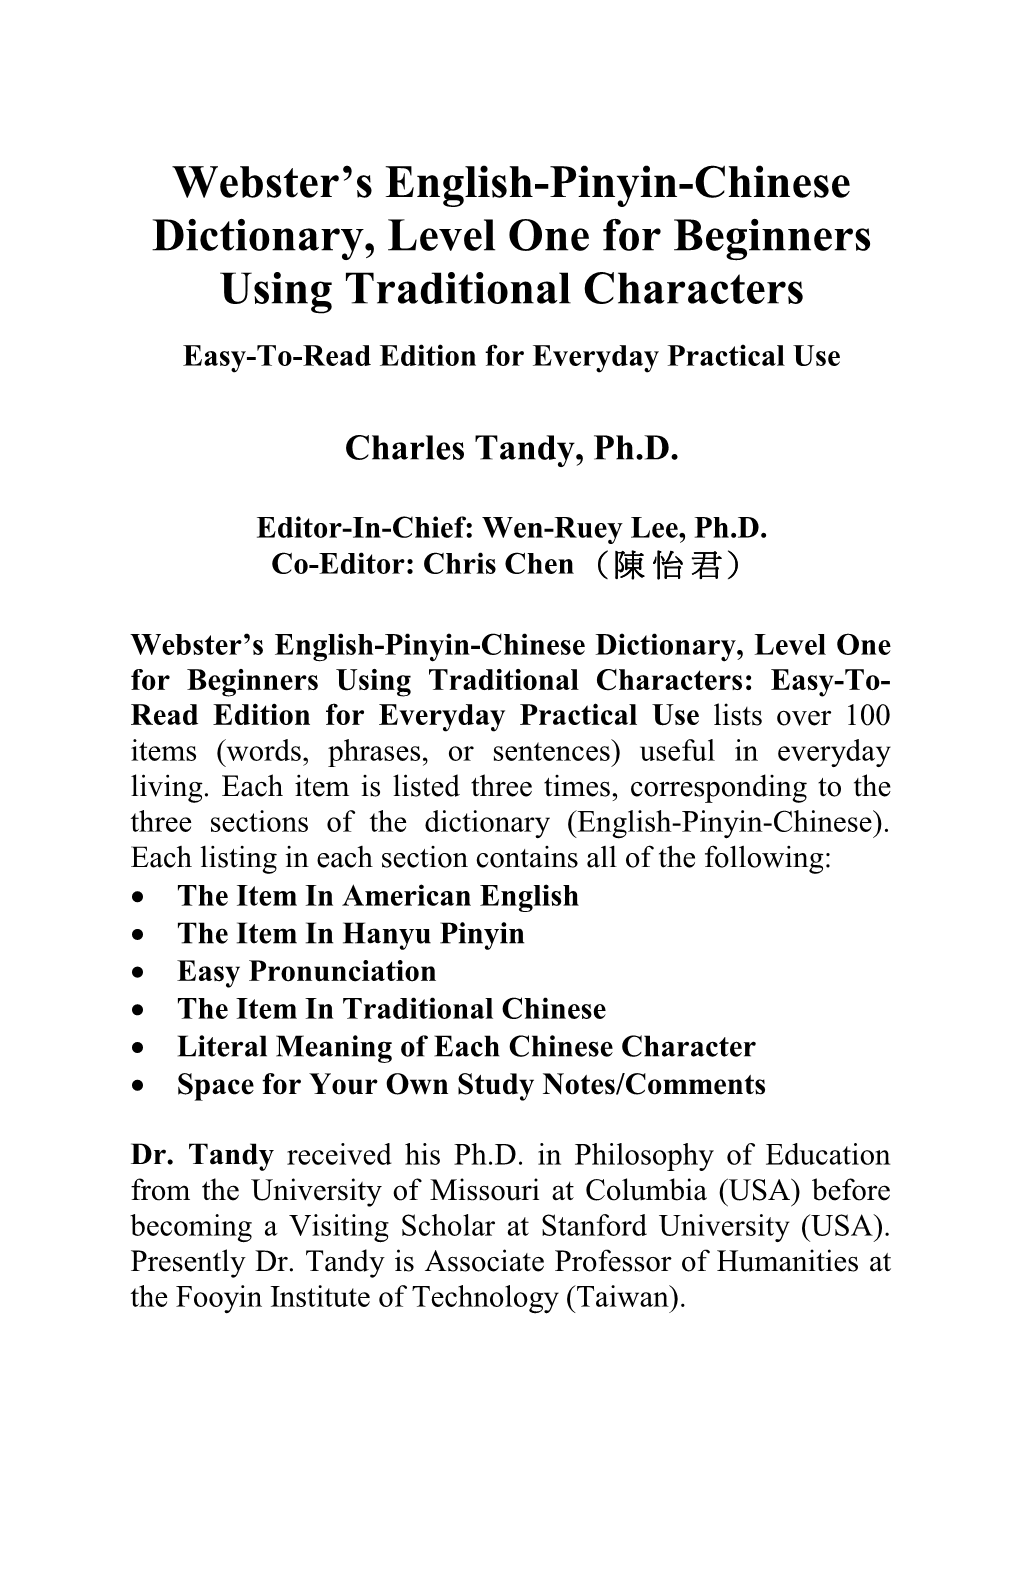 Webster's English-Pinyin-Chinese Dictionary, Level